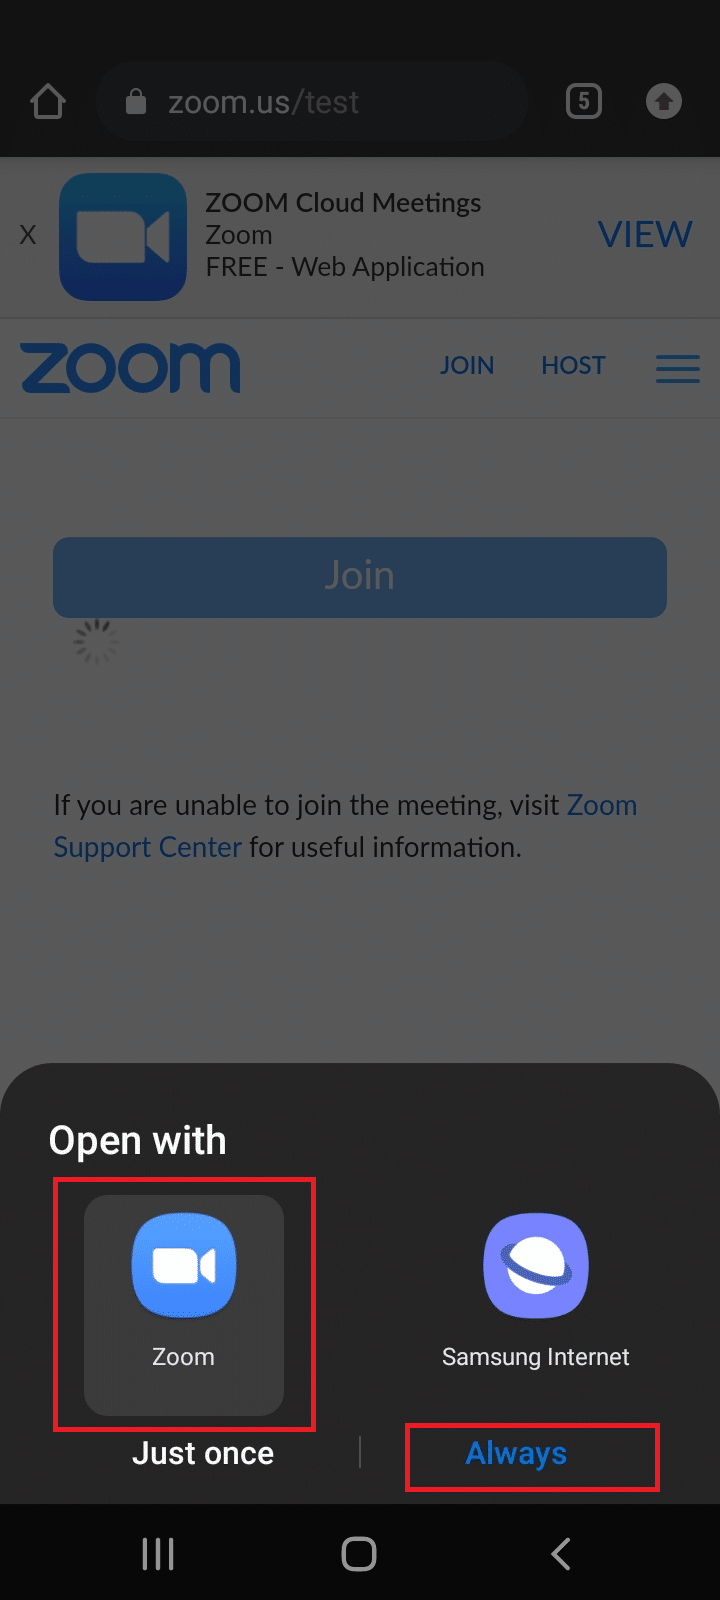 Zoom app and always option highlighted